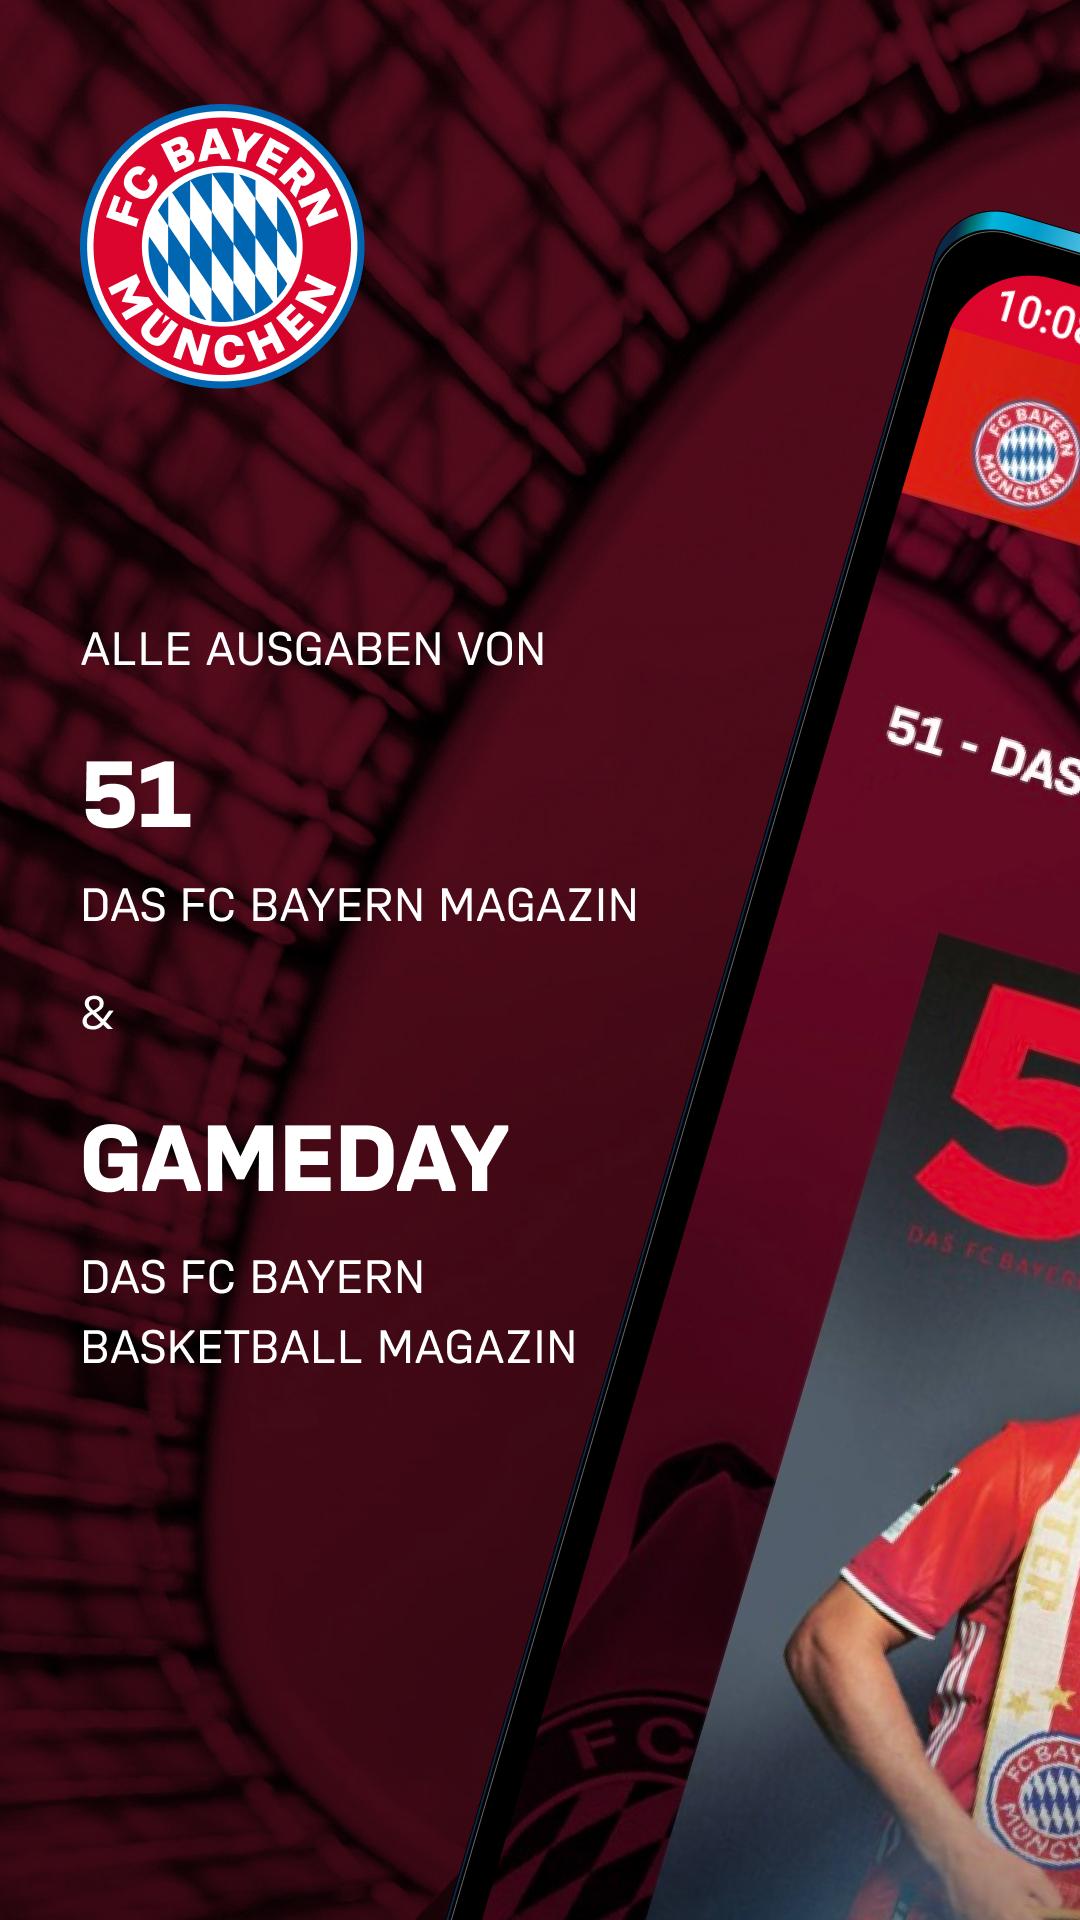 FC Bayern eMagazine App for Android - APK Download